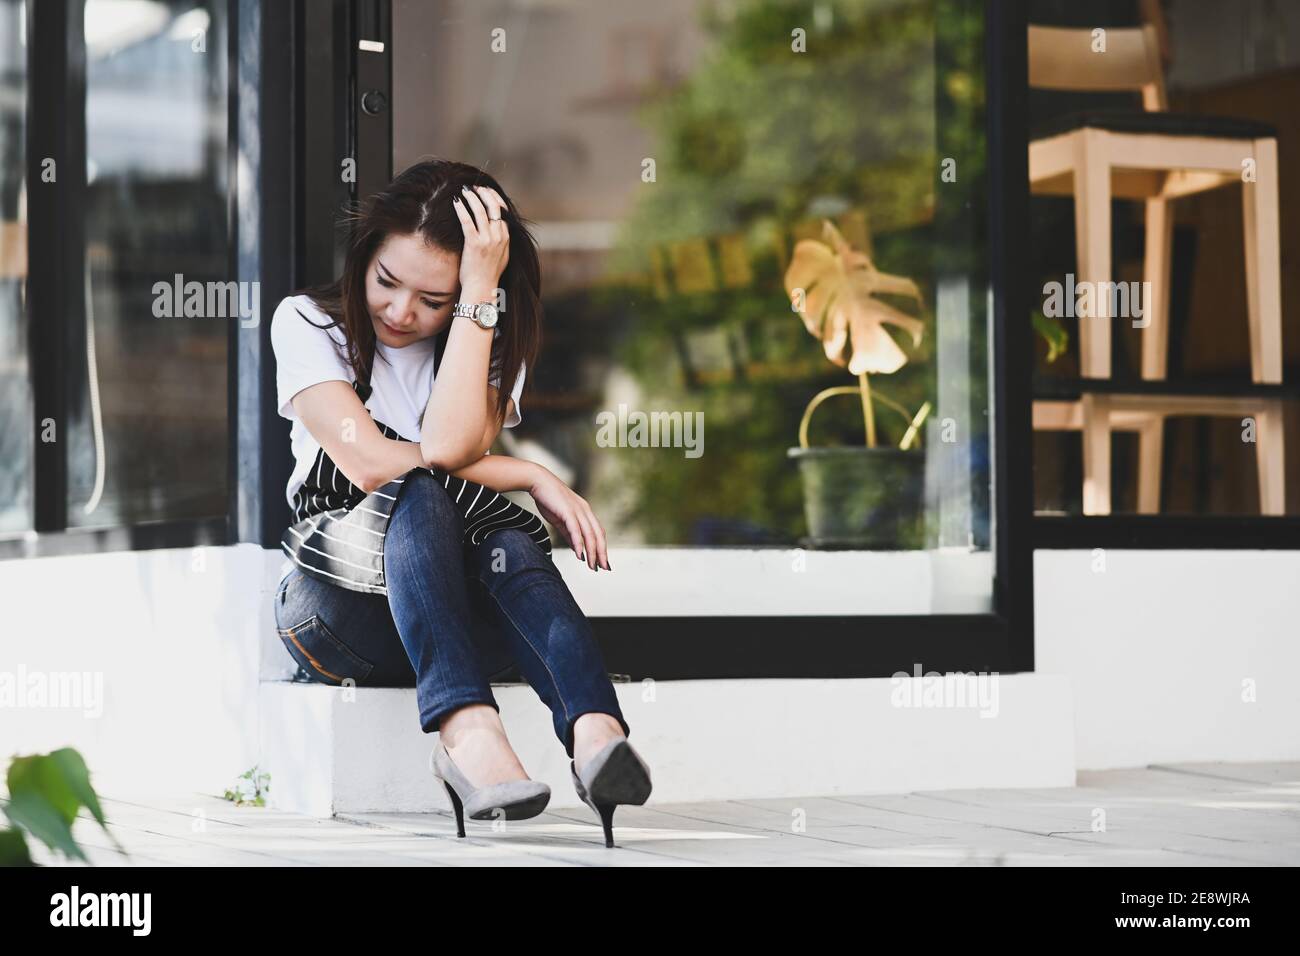 Startup small business entrepreneur woman feeling stress because of economic conditions while sitting in front of her coffee shop. Stock Photo